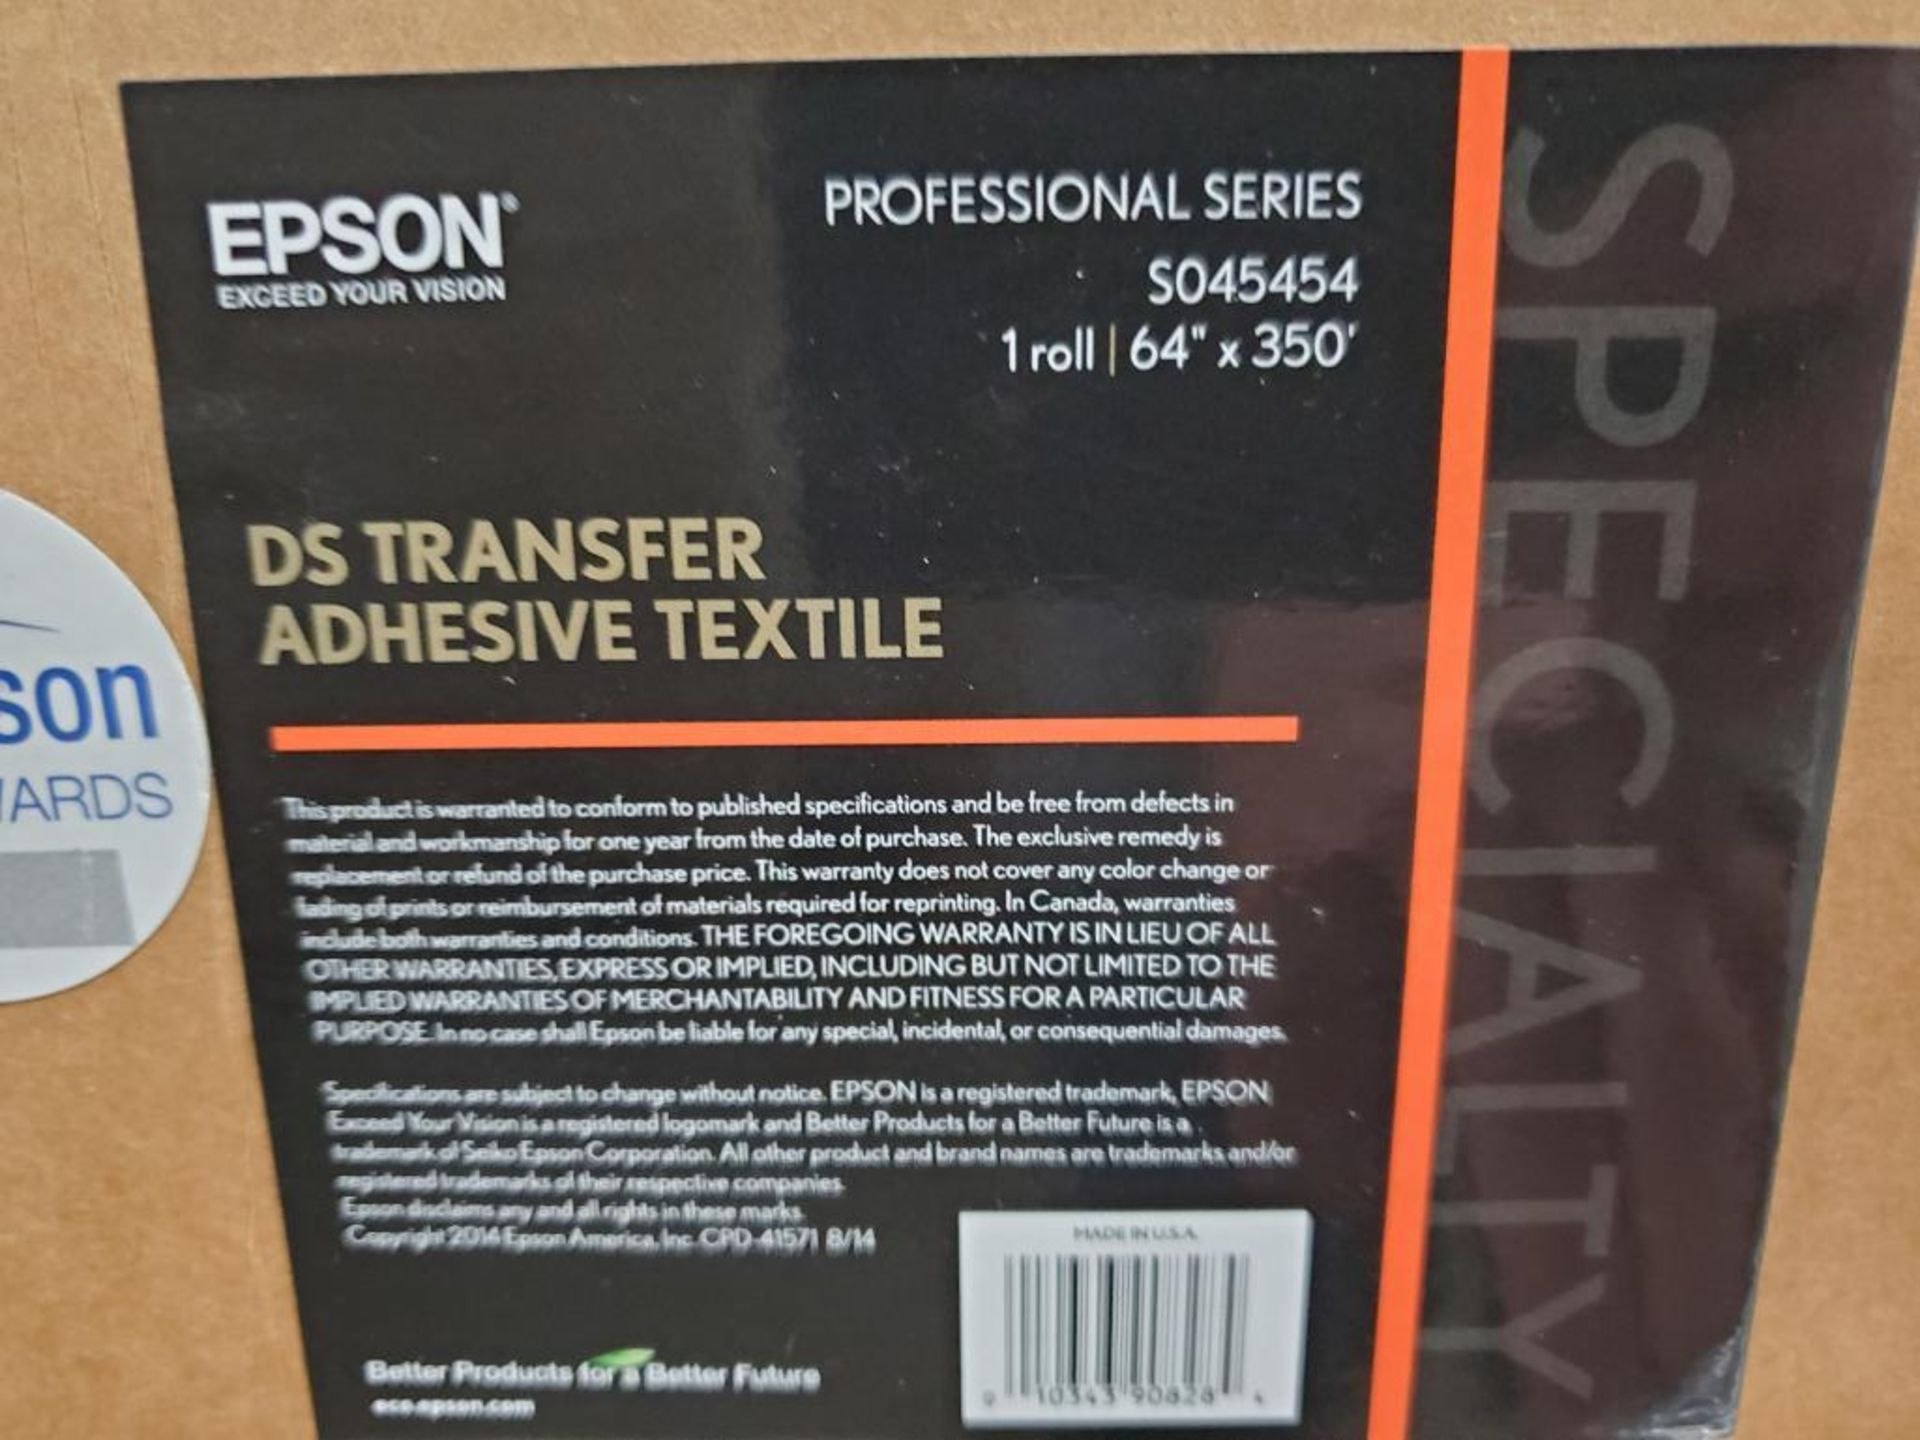 (36) BOXES OF EPSON DS TRANSFER ADHESIVE TEXTILE, 64 IN X 350 FT, (1) ROLL, PRODUCTION SERIES, S0454 - Image 5 of 10